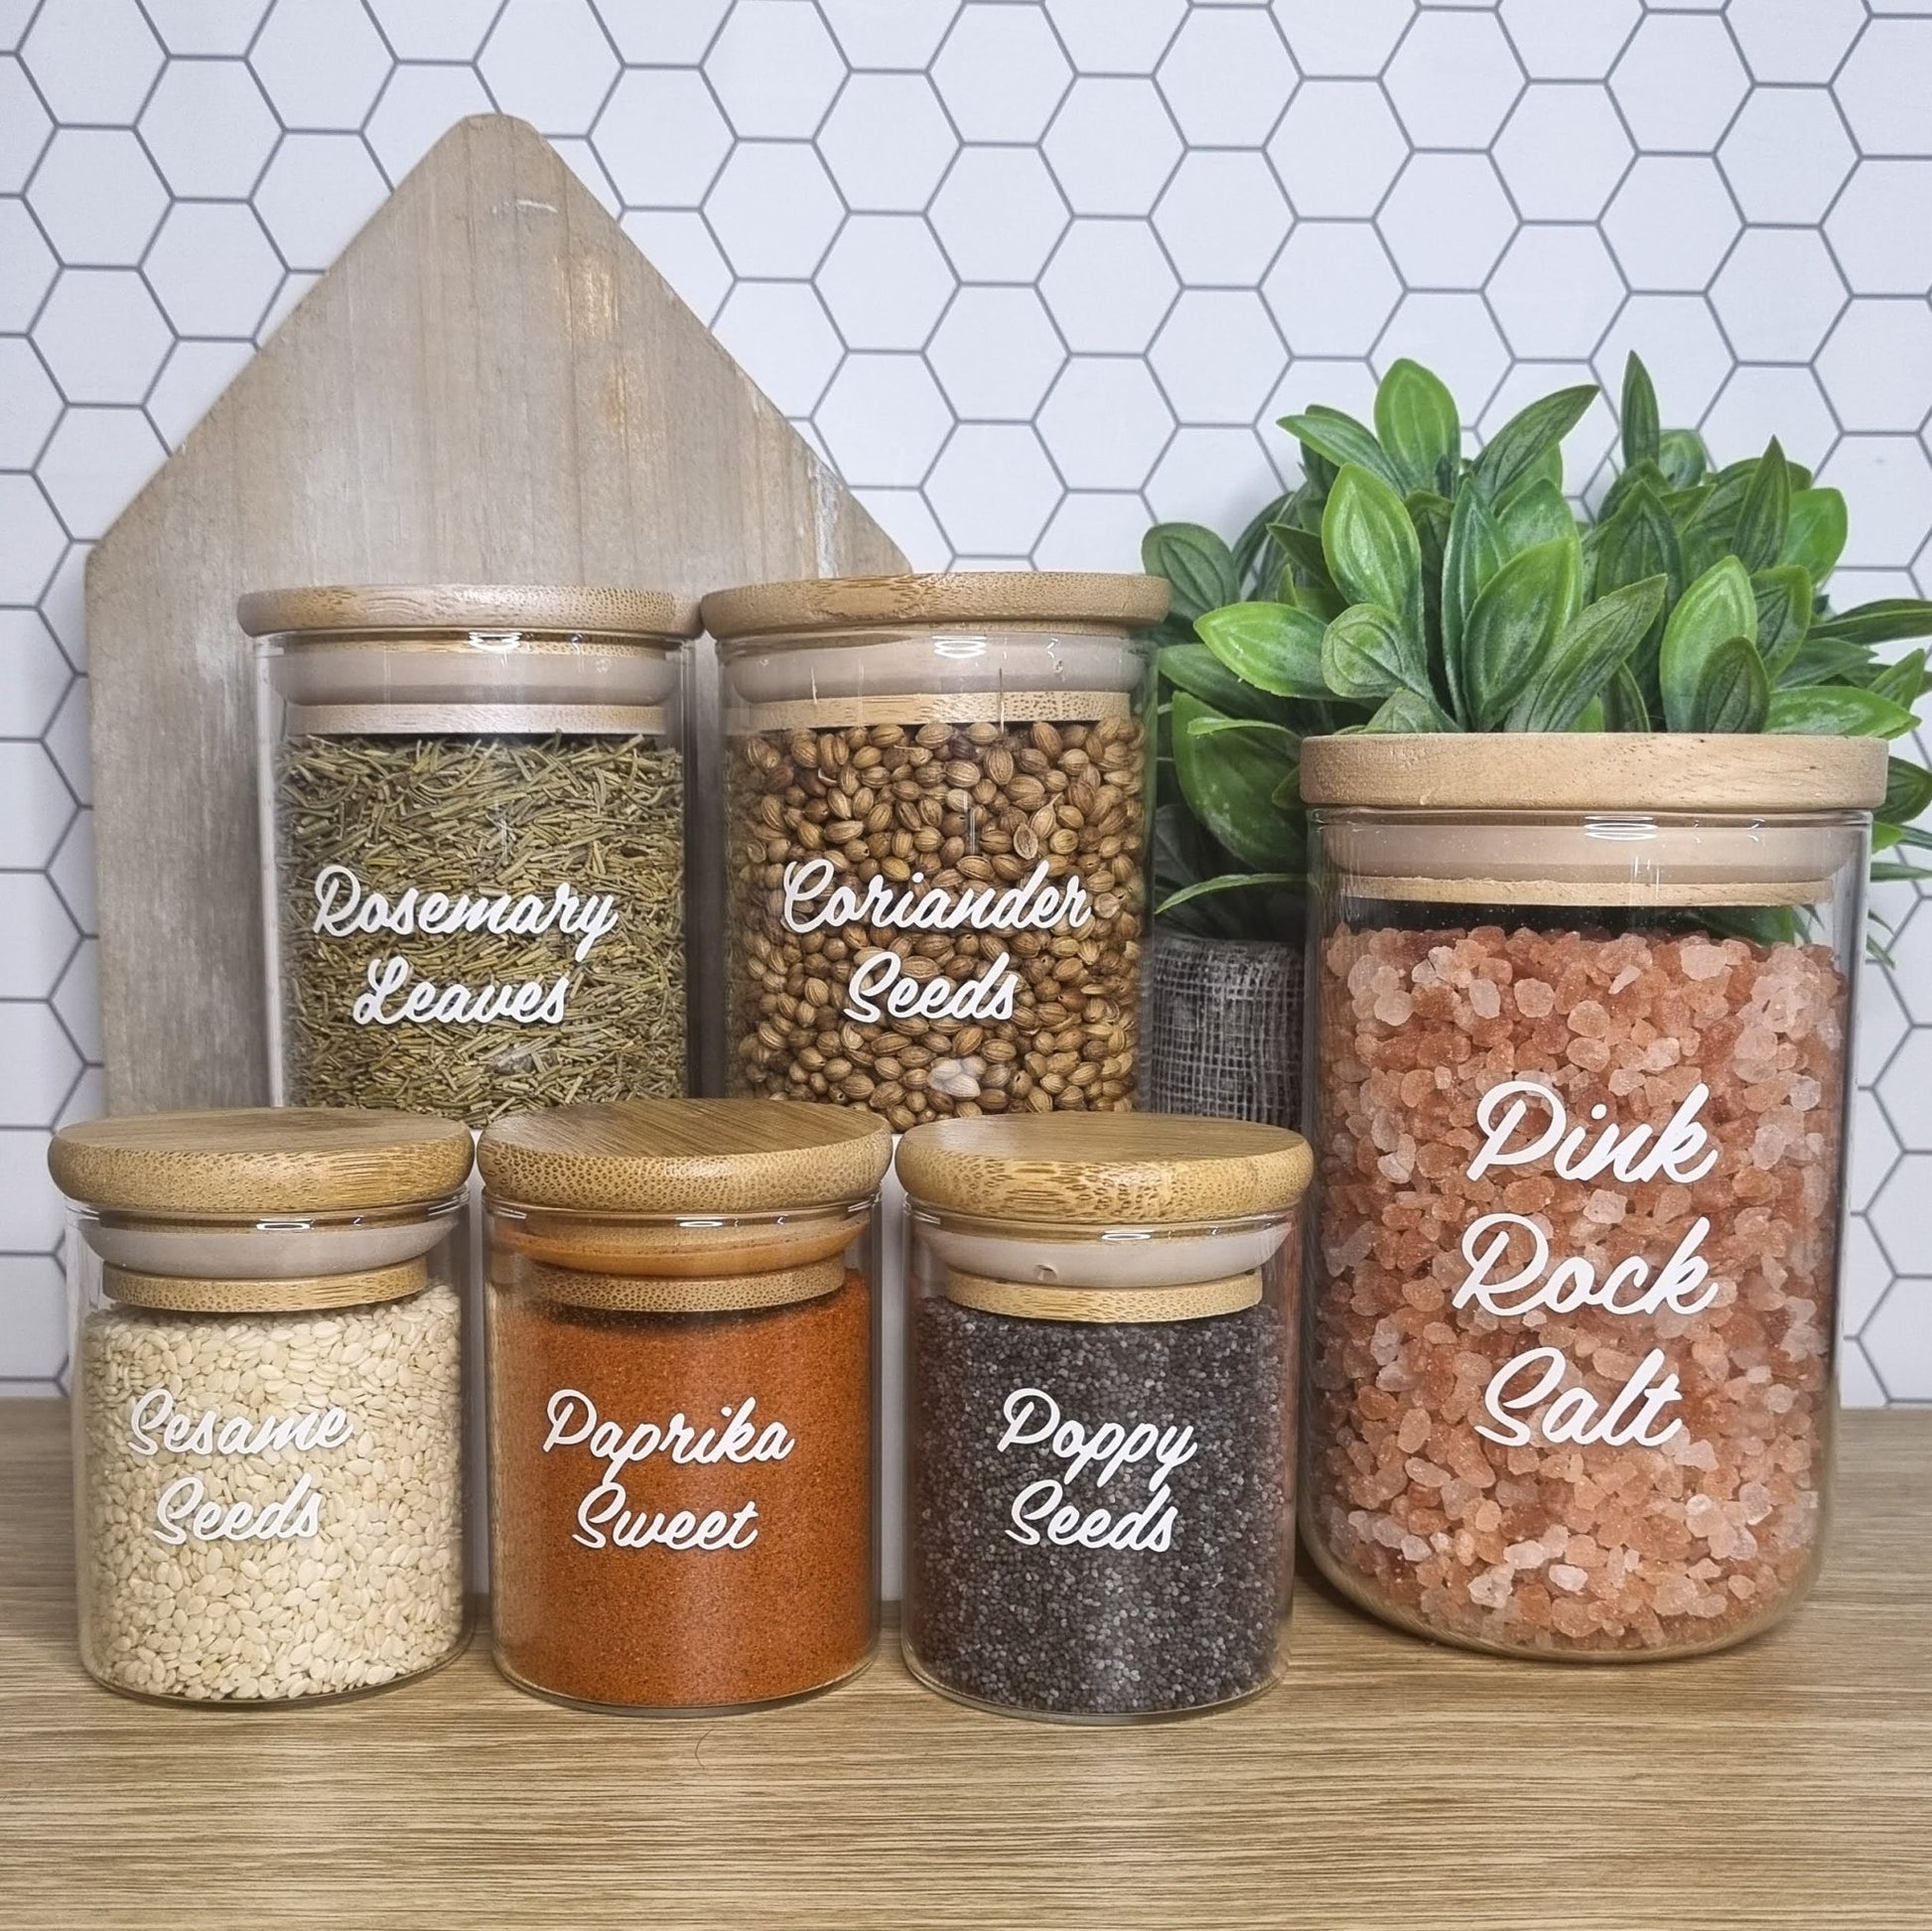 Herb and Spice Jars: 6 x Glass Herb and Spice Jars with Wooden Lids